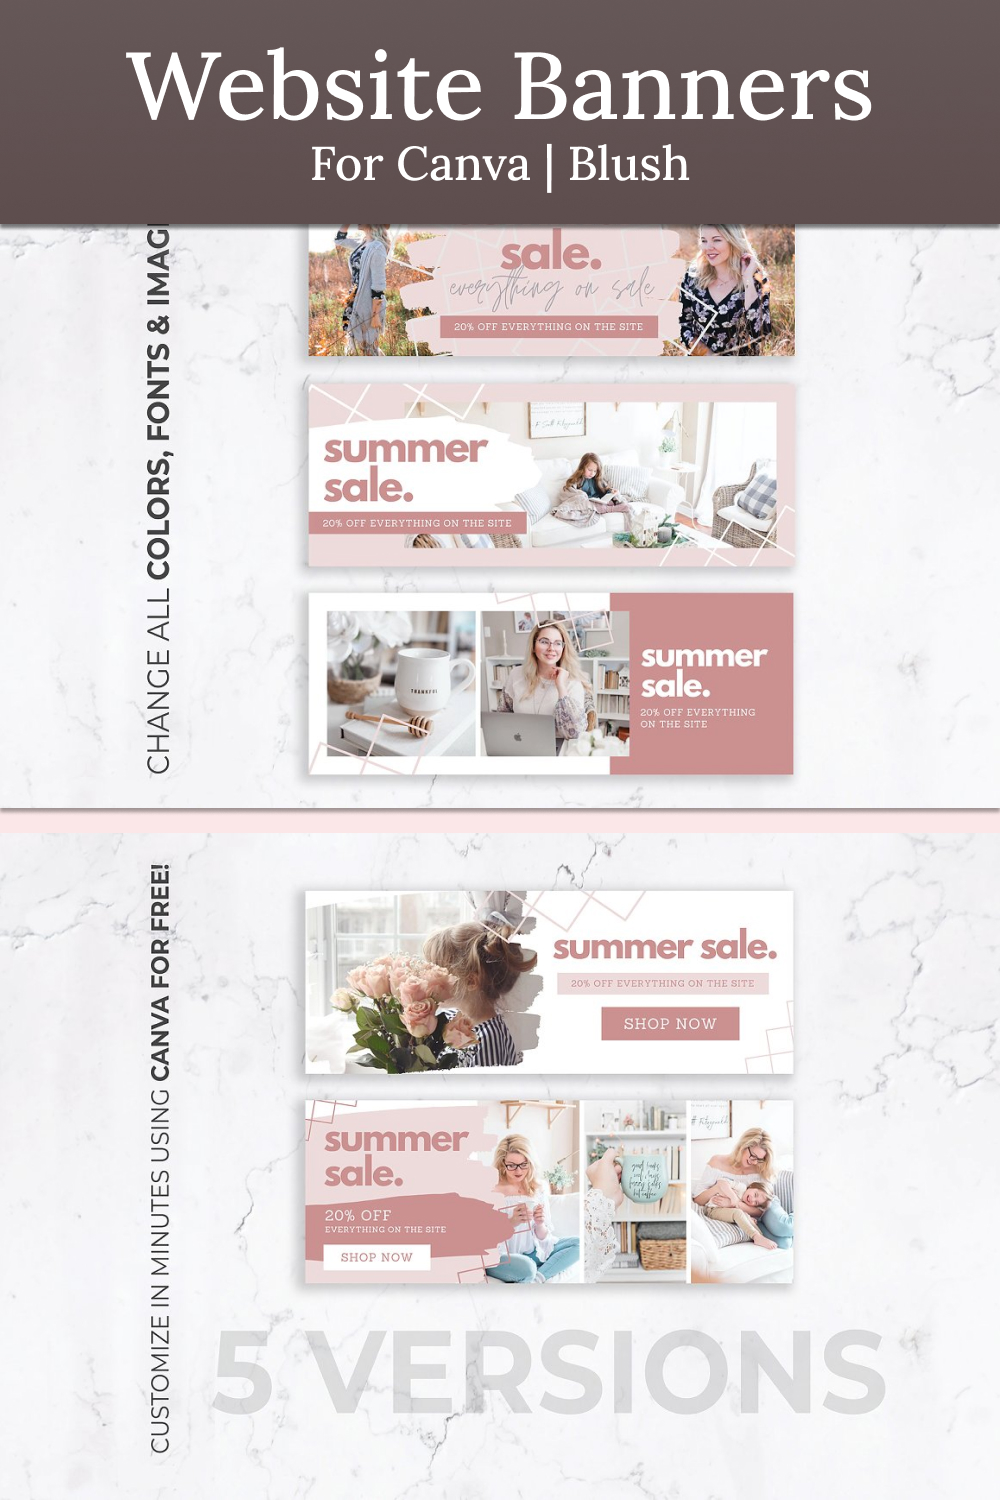 Website banners for canva blush of pinterest.